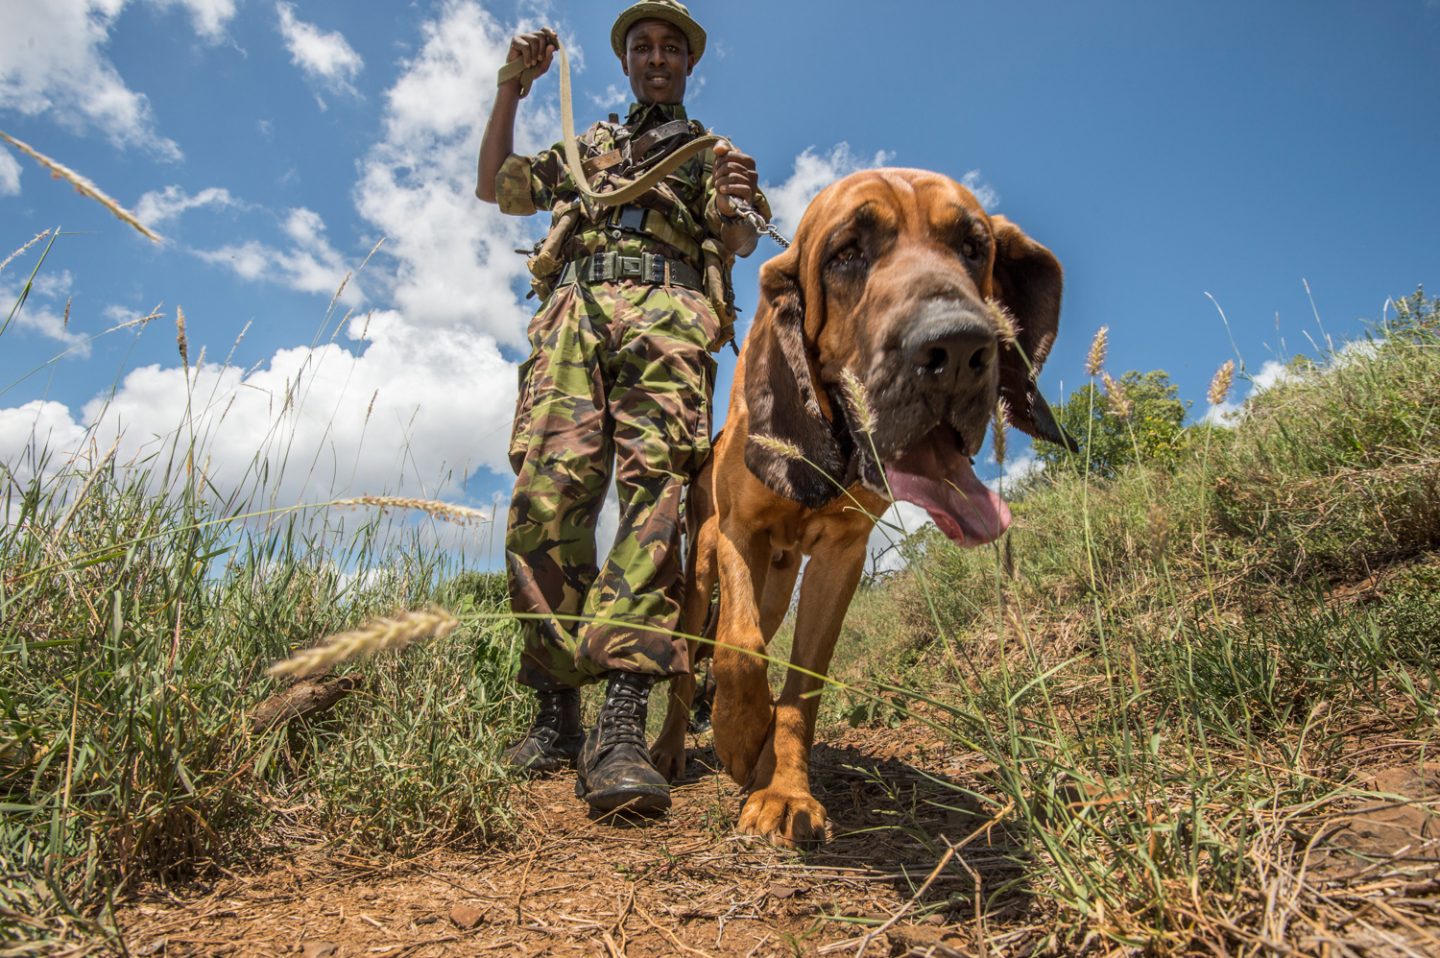 Conservation: We can arrange behind the scenes access to the onsite conservation and community departments including; meeting the Lewa dog handling unit and observe a demonstration of the scent tracking used to stop poachers, spend time with the security HQ and learn about the sophisticated system the rangers use to monitor wildlife, visit the Conservation Education Centre, one of their many Community Healthcare Clinics or spend time with the team providing water access to local communities and their livestock. All of these programmes are supported by Tusk.